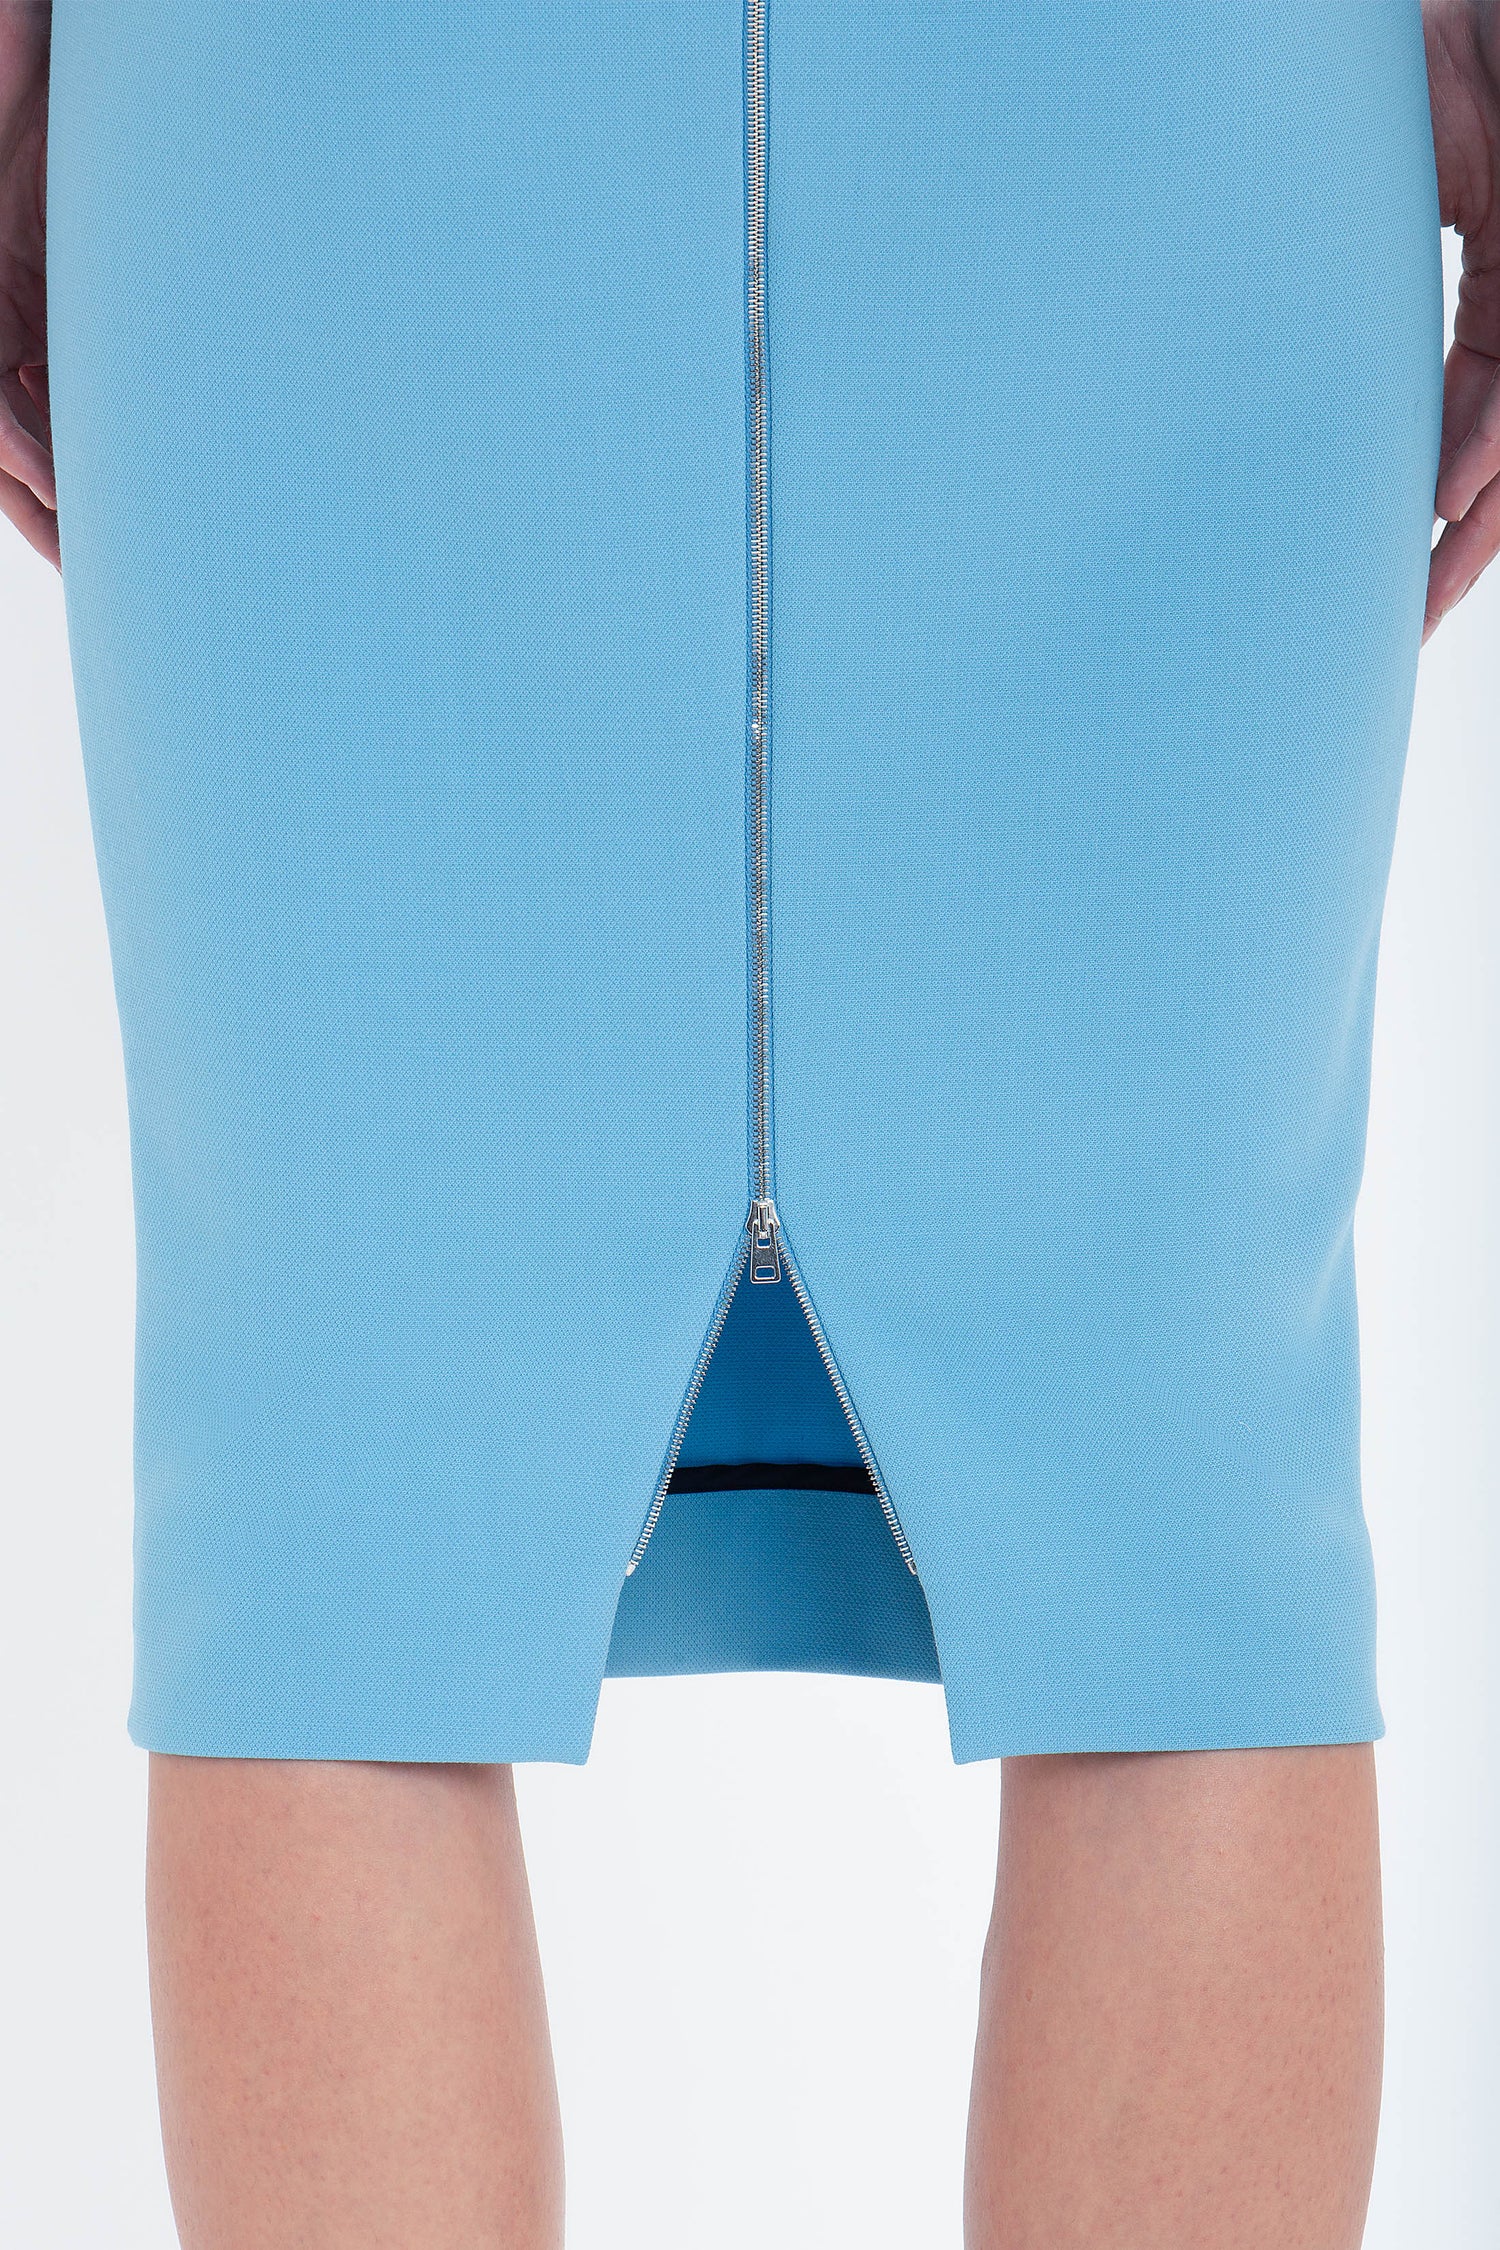 Close-up view of a Victoria Beckham Exclusive Fitted T-Shirt Dress In Periwinkle Blue with a full-length back zipper, worn by a woman, showing the lower back down to the knees.